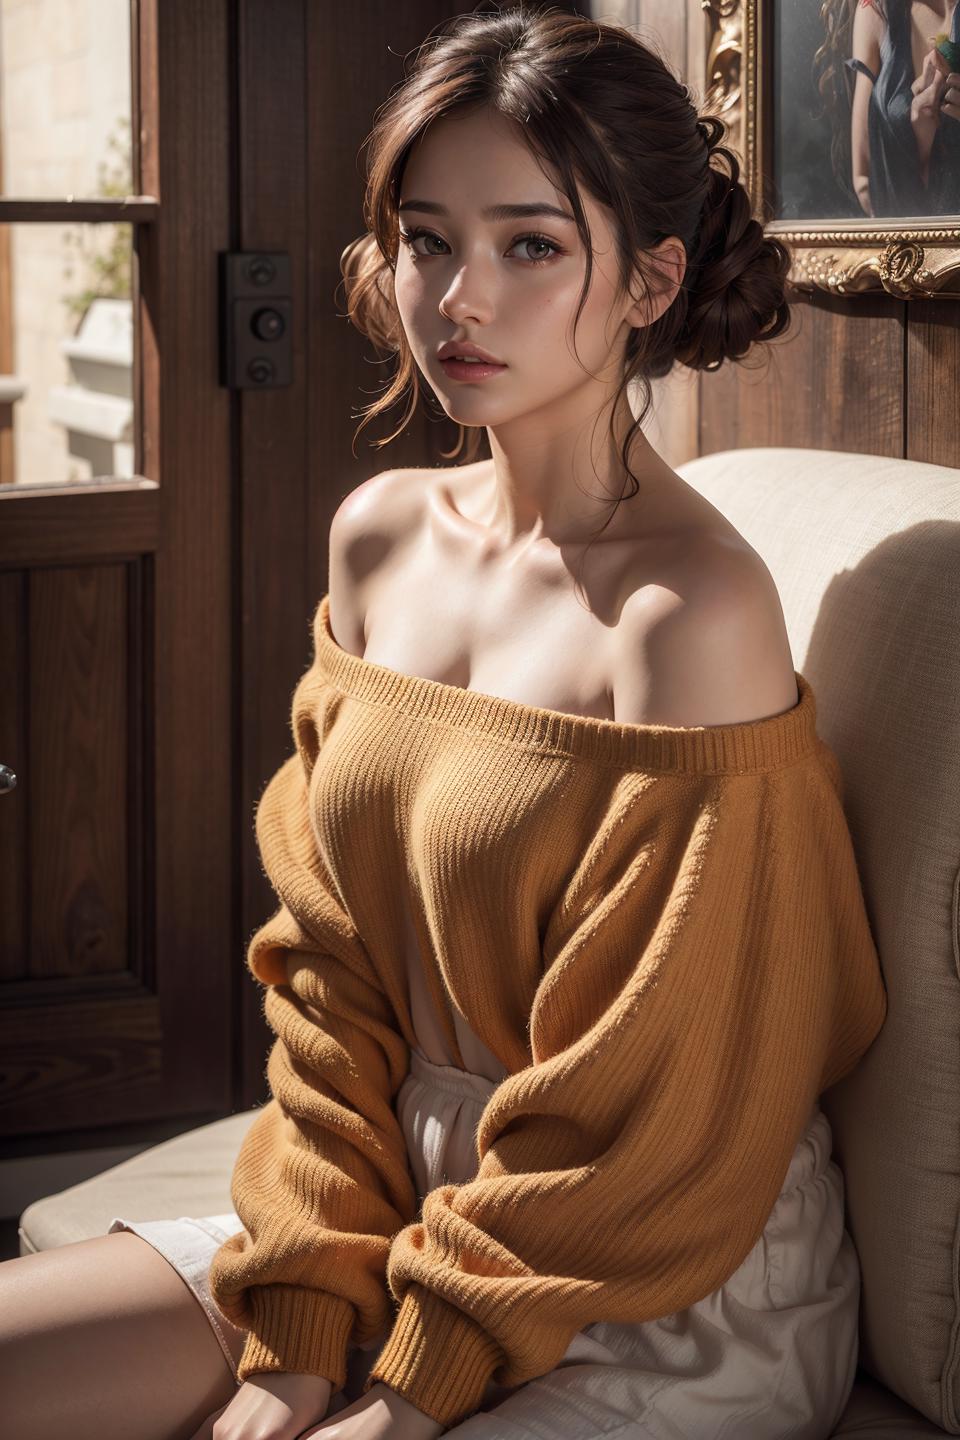 A woman wearing a yellow sweater sitting in a chair.